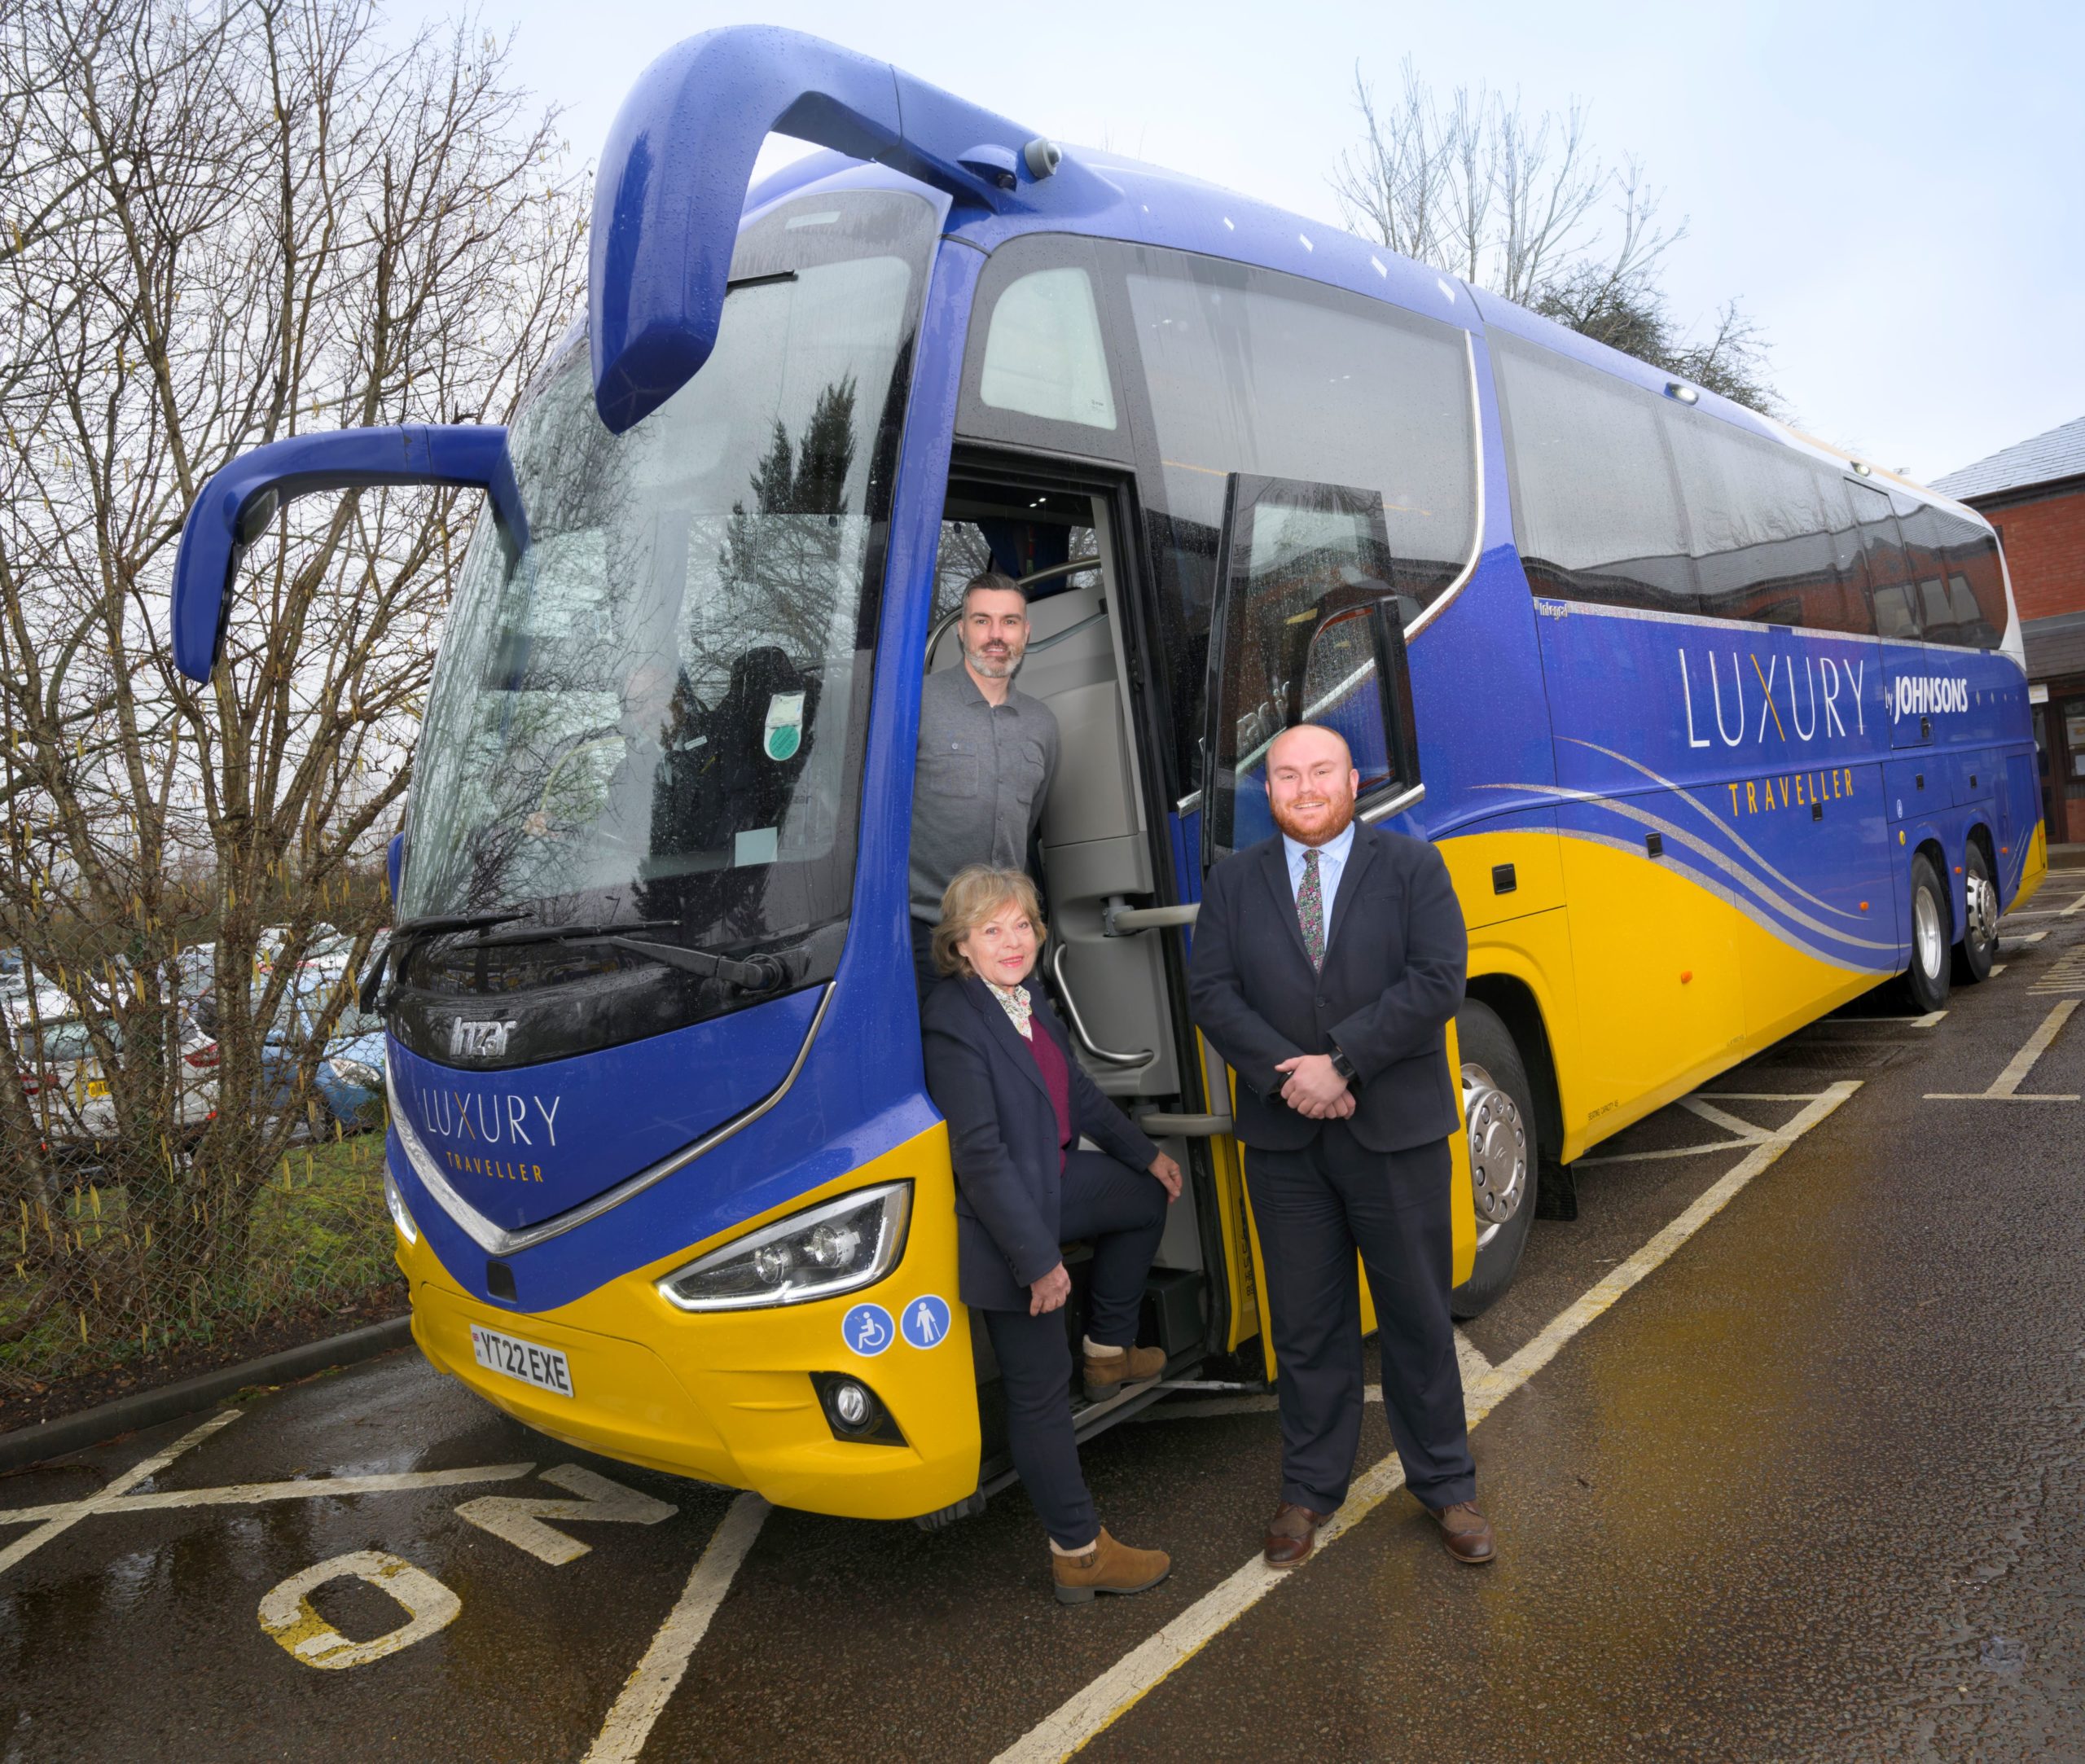 Johnsons Coaches reports sales of over £17million